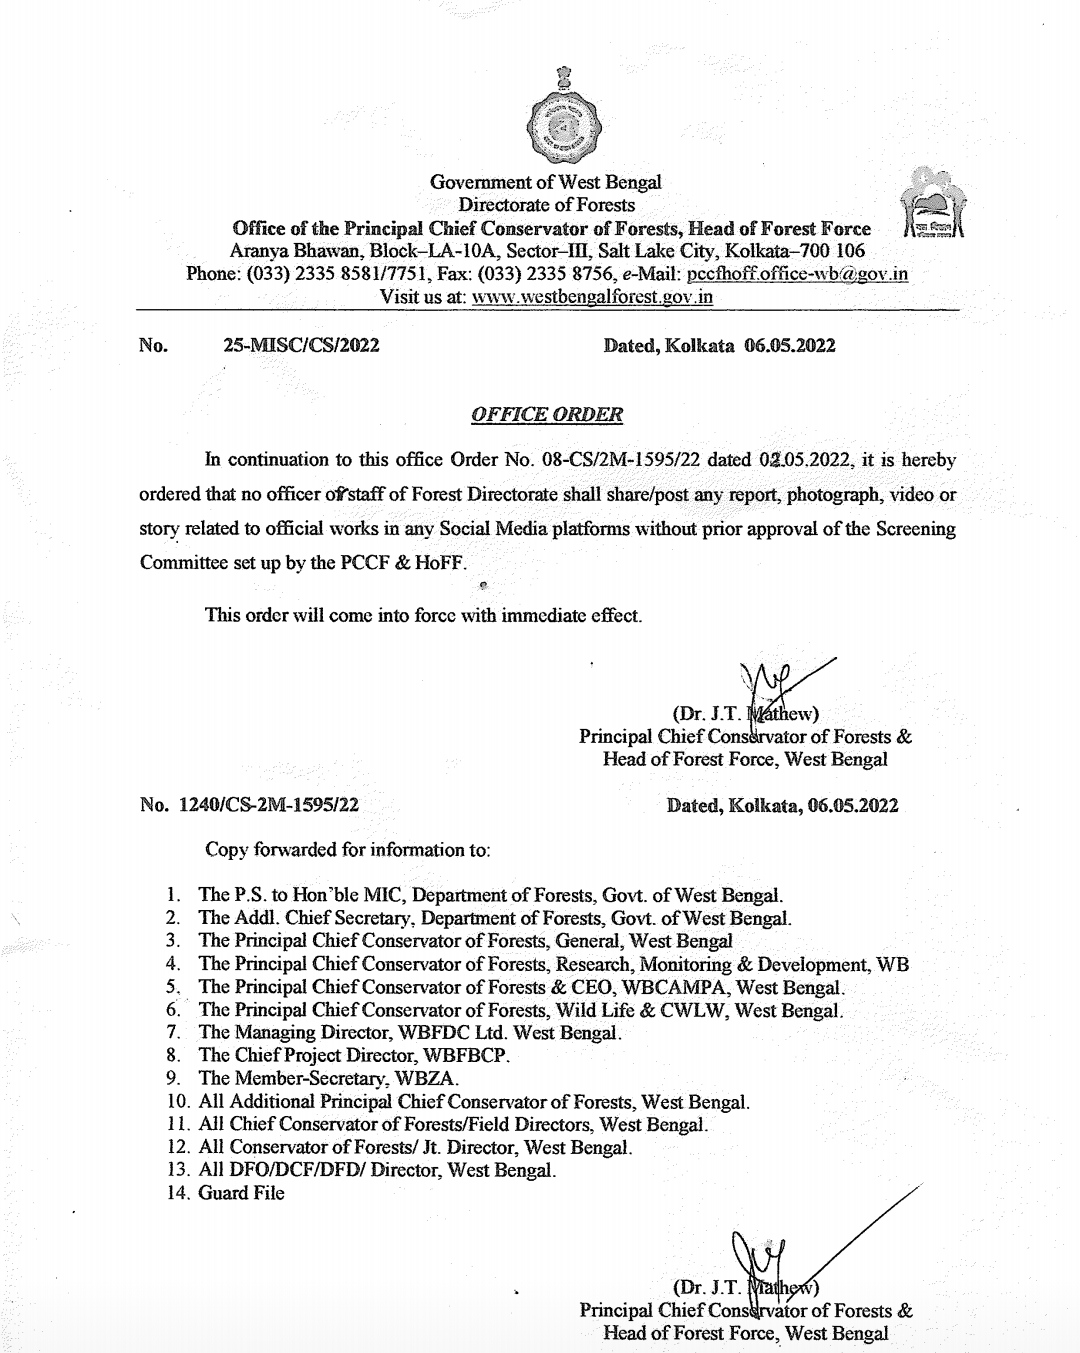 new advisory of forest department says no workers shall post photos videos related to their work